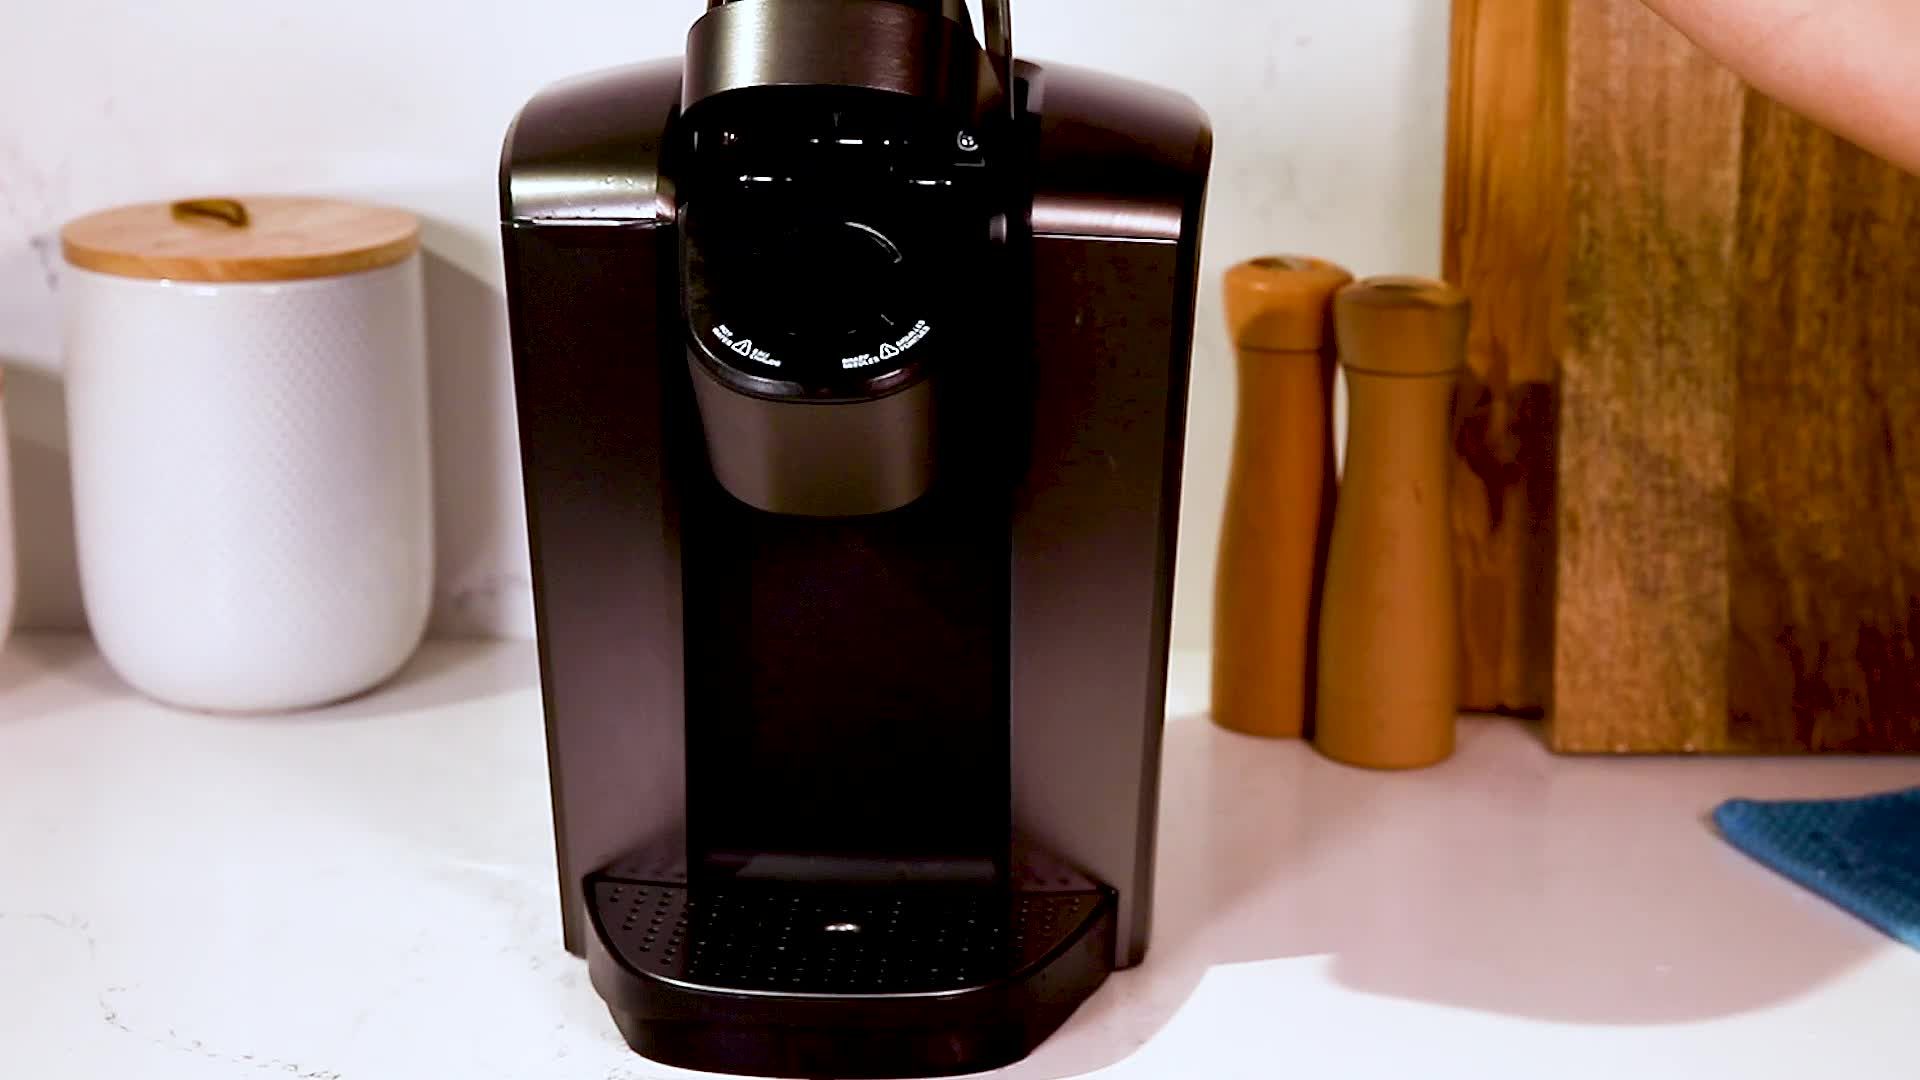 How Long Can You Use Your Keurig Before It Starts Growing Mold?